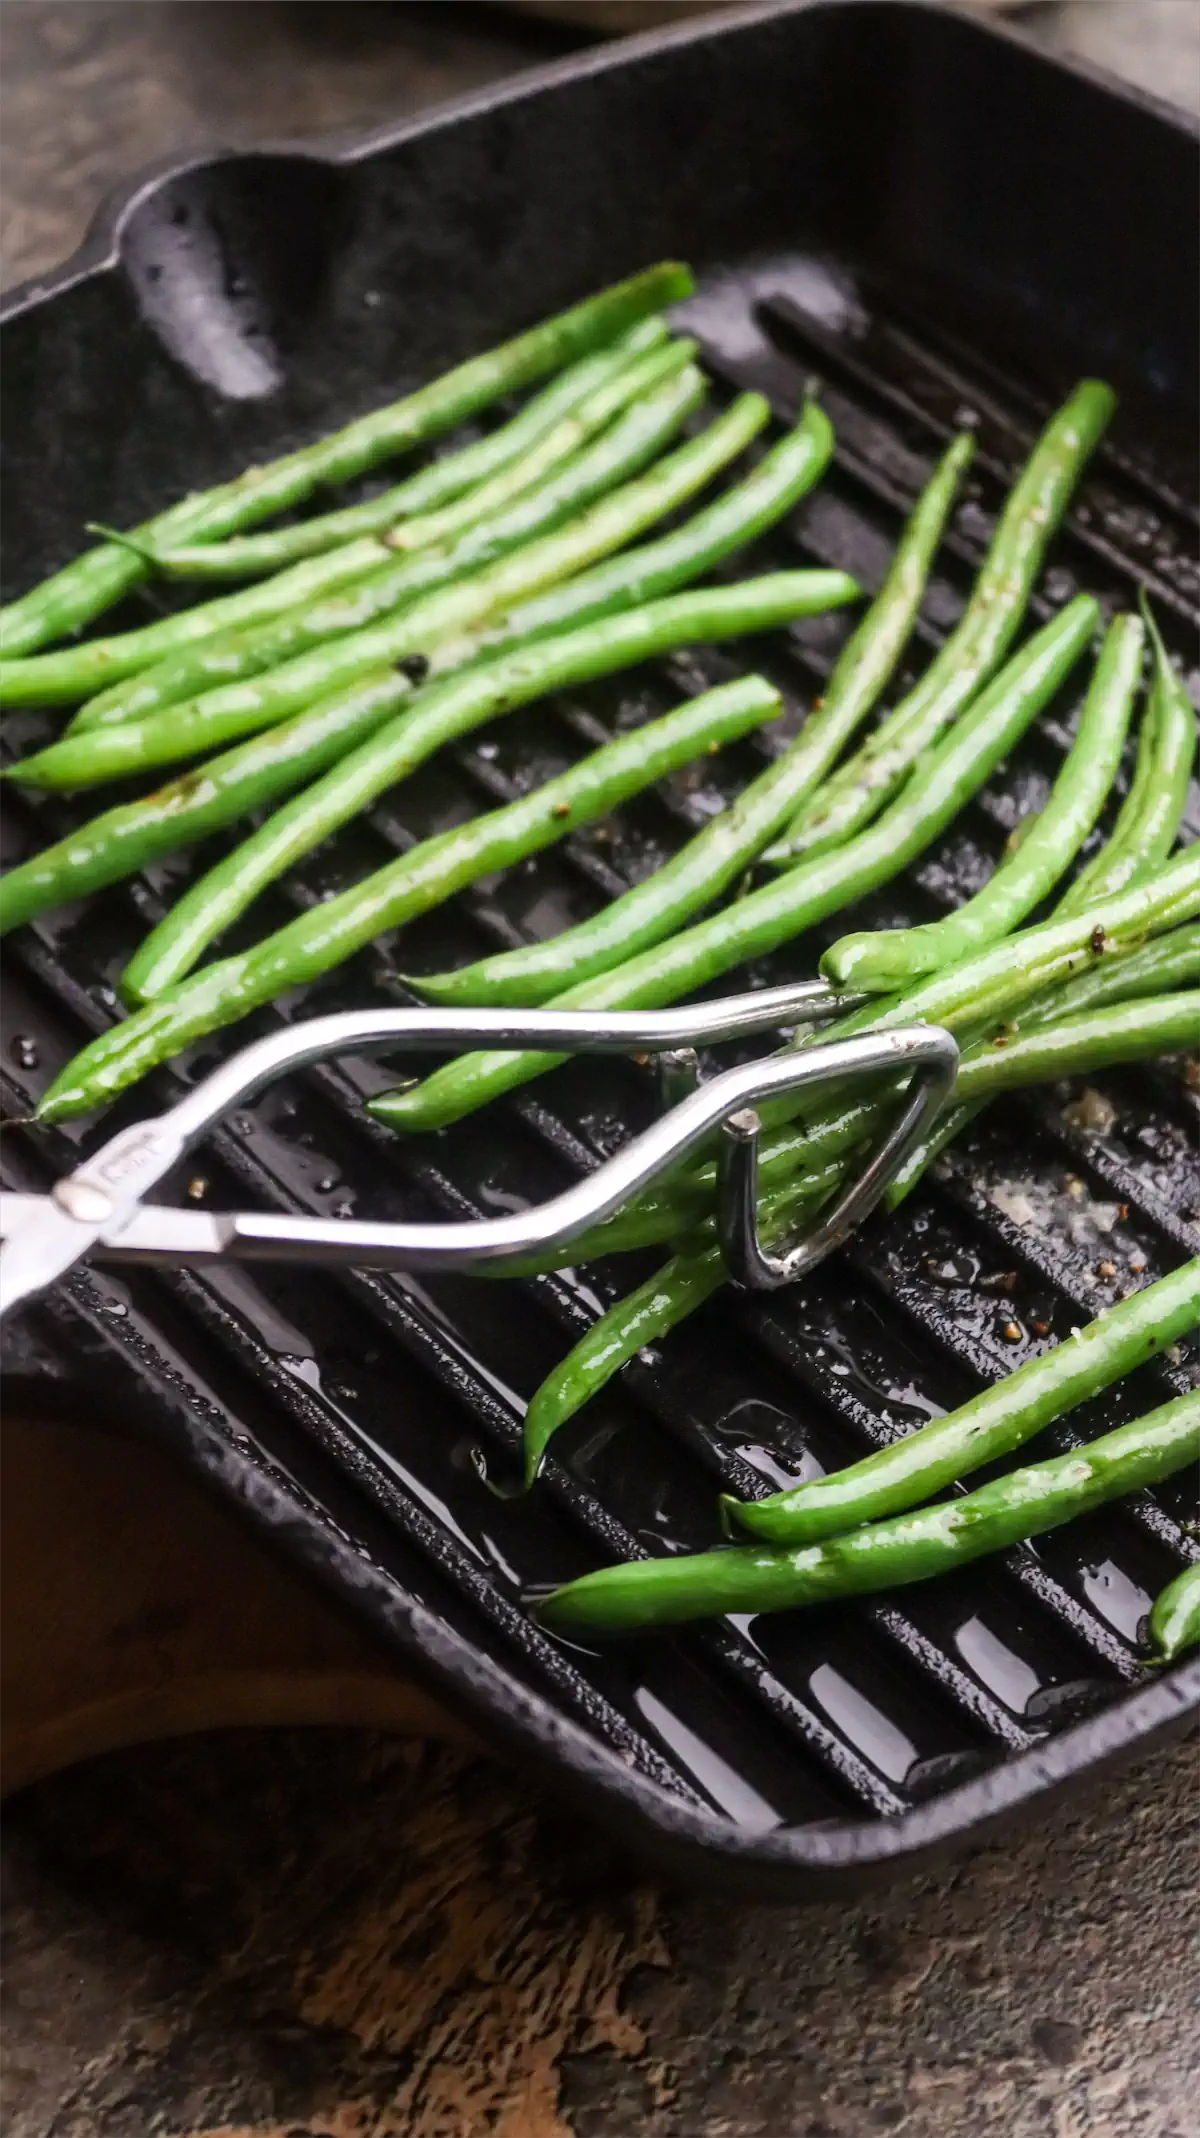 Green beans are getting turned using tongs on a cast iron grill skillet.